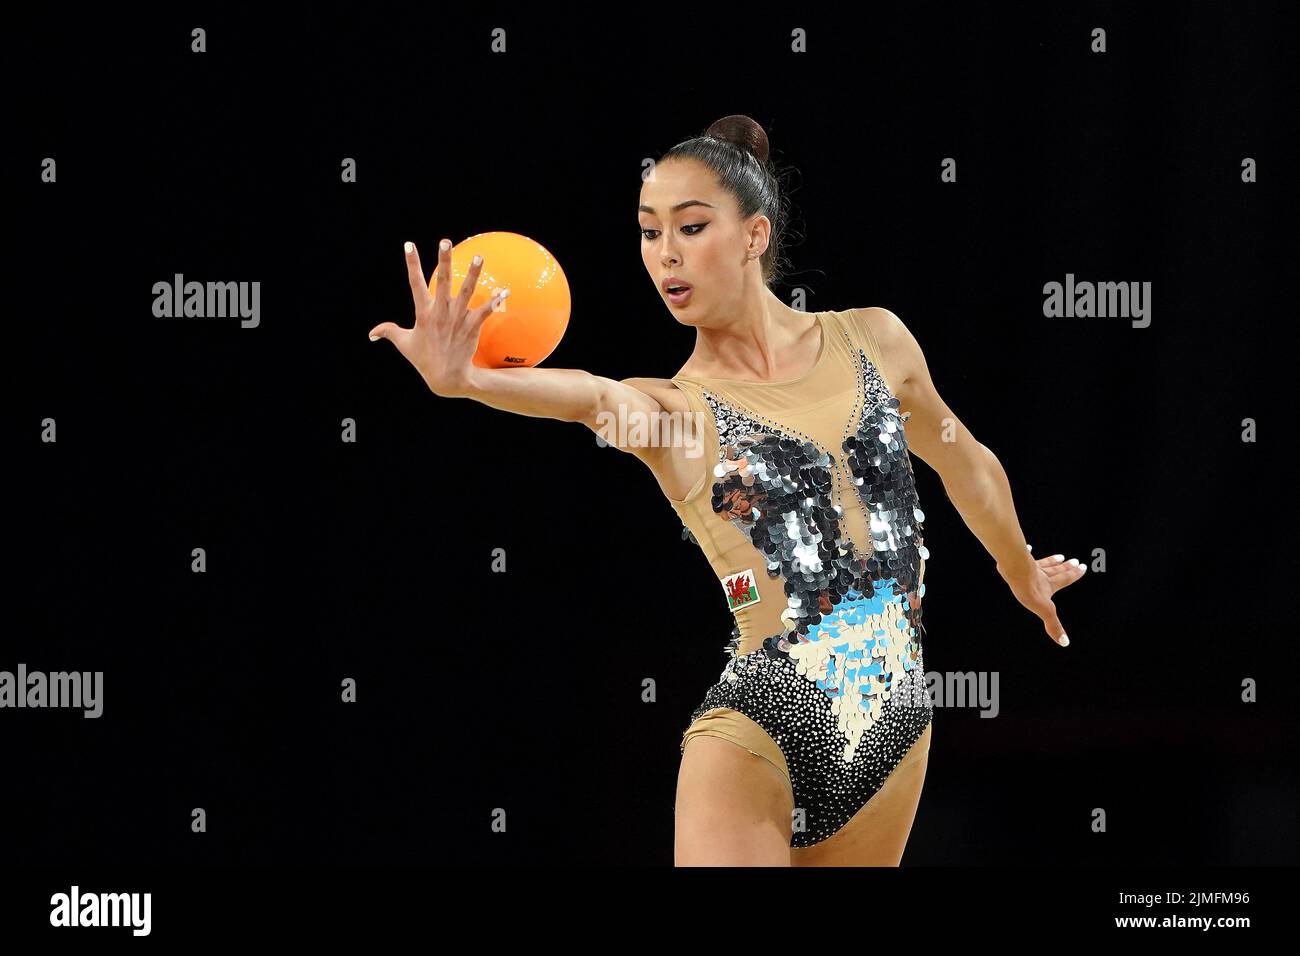 Wales' Gemma Frizelle competes during the ball final rhythmic gymnastics event at Arena Birmingham on day nine of the 2022 Commonwealth Games in Birmingham. Picture date: Saturday August 6, 2022. Stock Photo